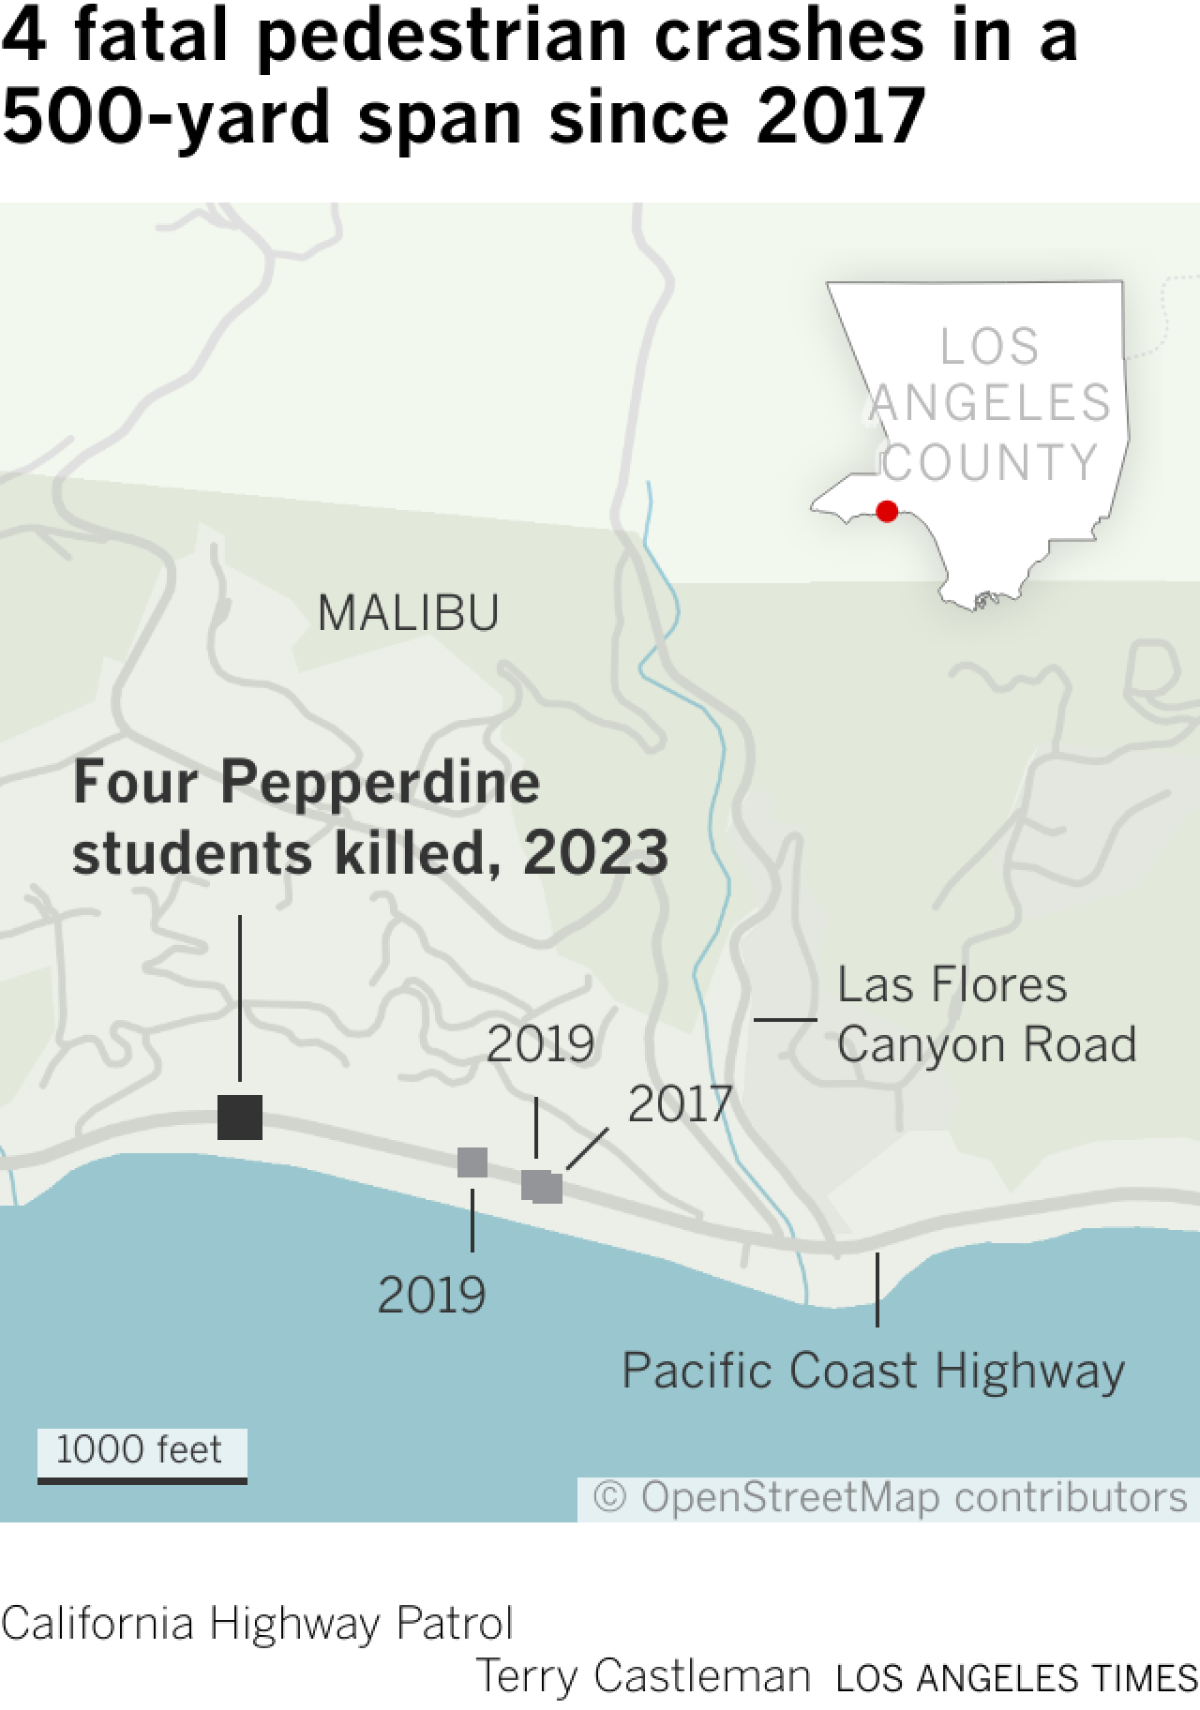 Map shows locations of four recent pedestrian fatality crashes along Malibu's Pacific Coast Highway